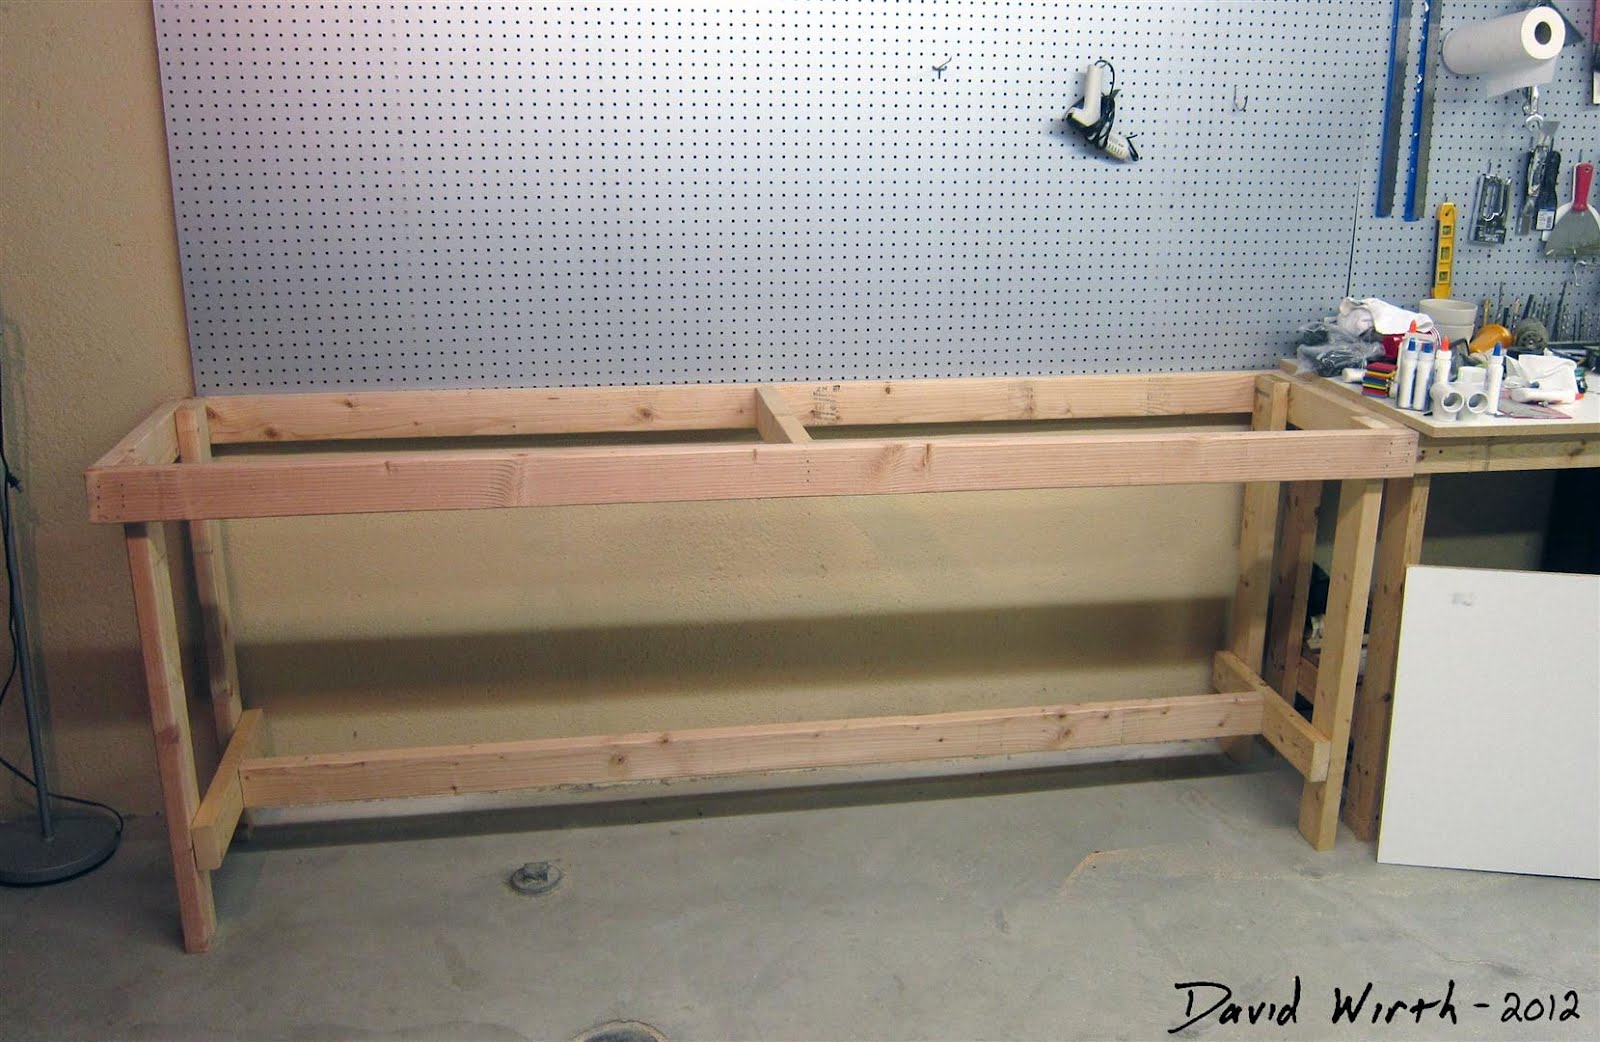 Garage Workbench Plans 2x4 Wood 2x4s bench and peg board